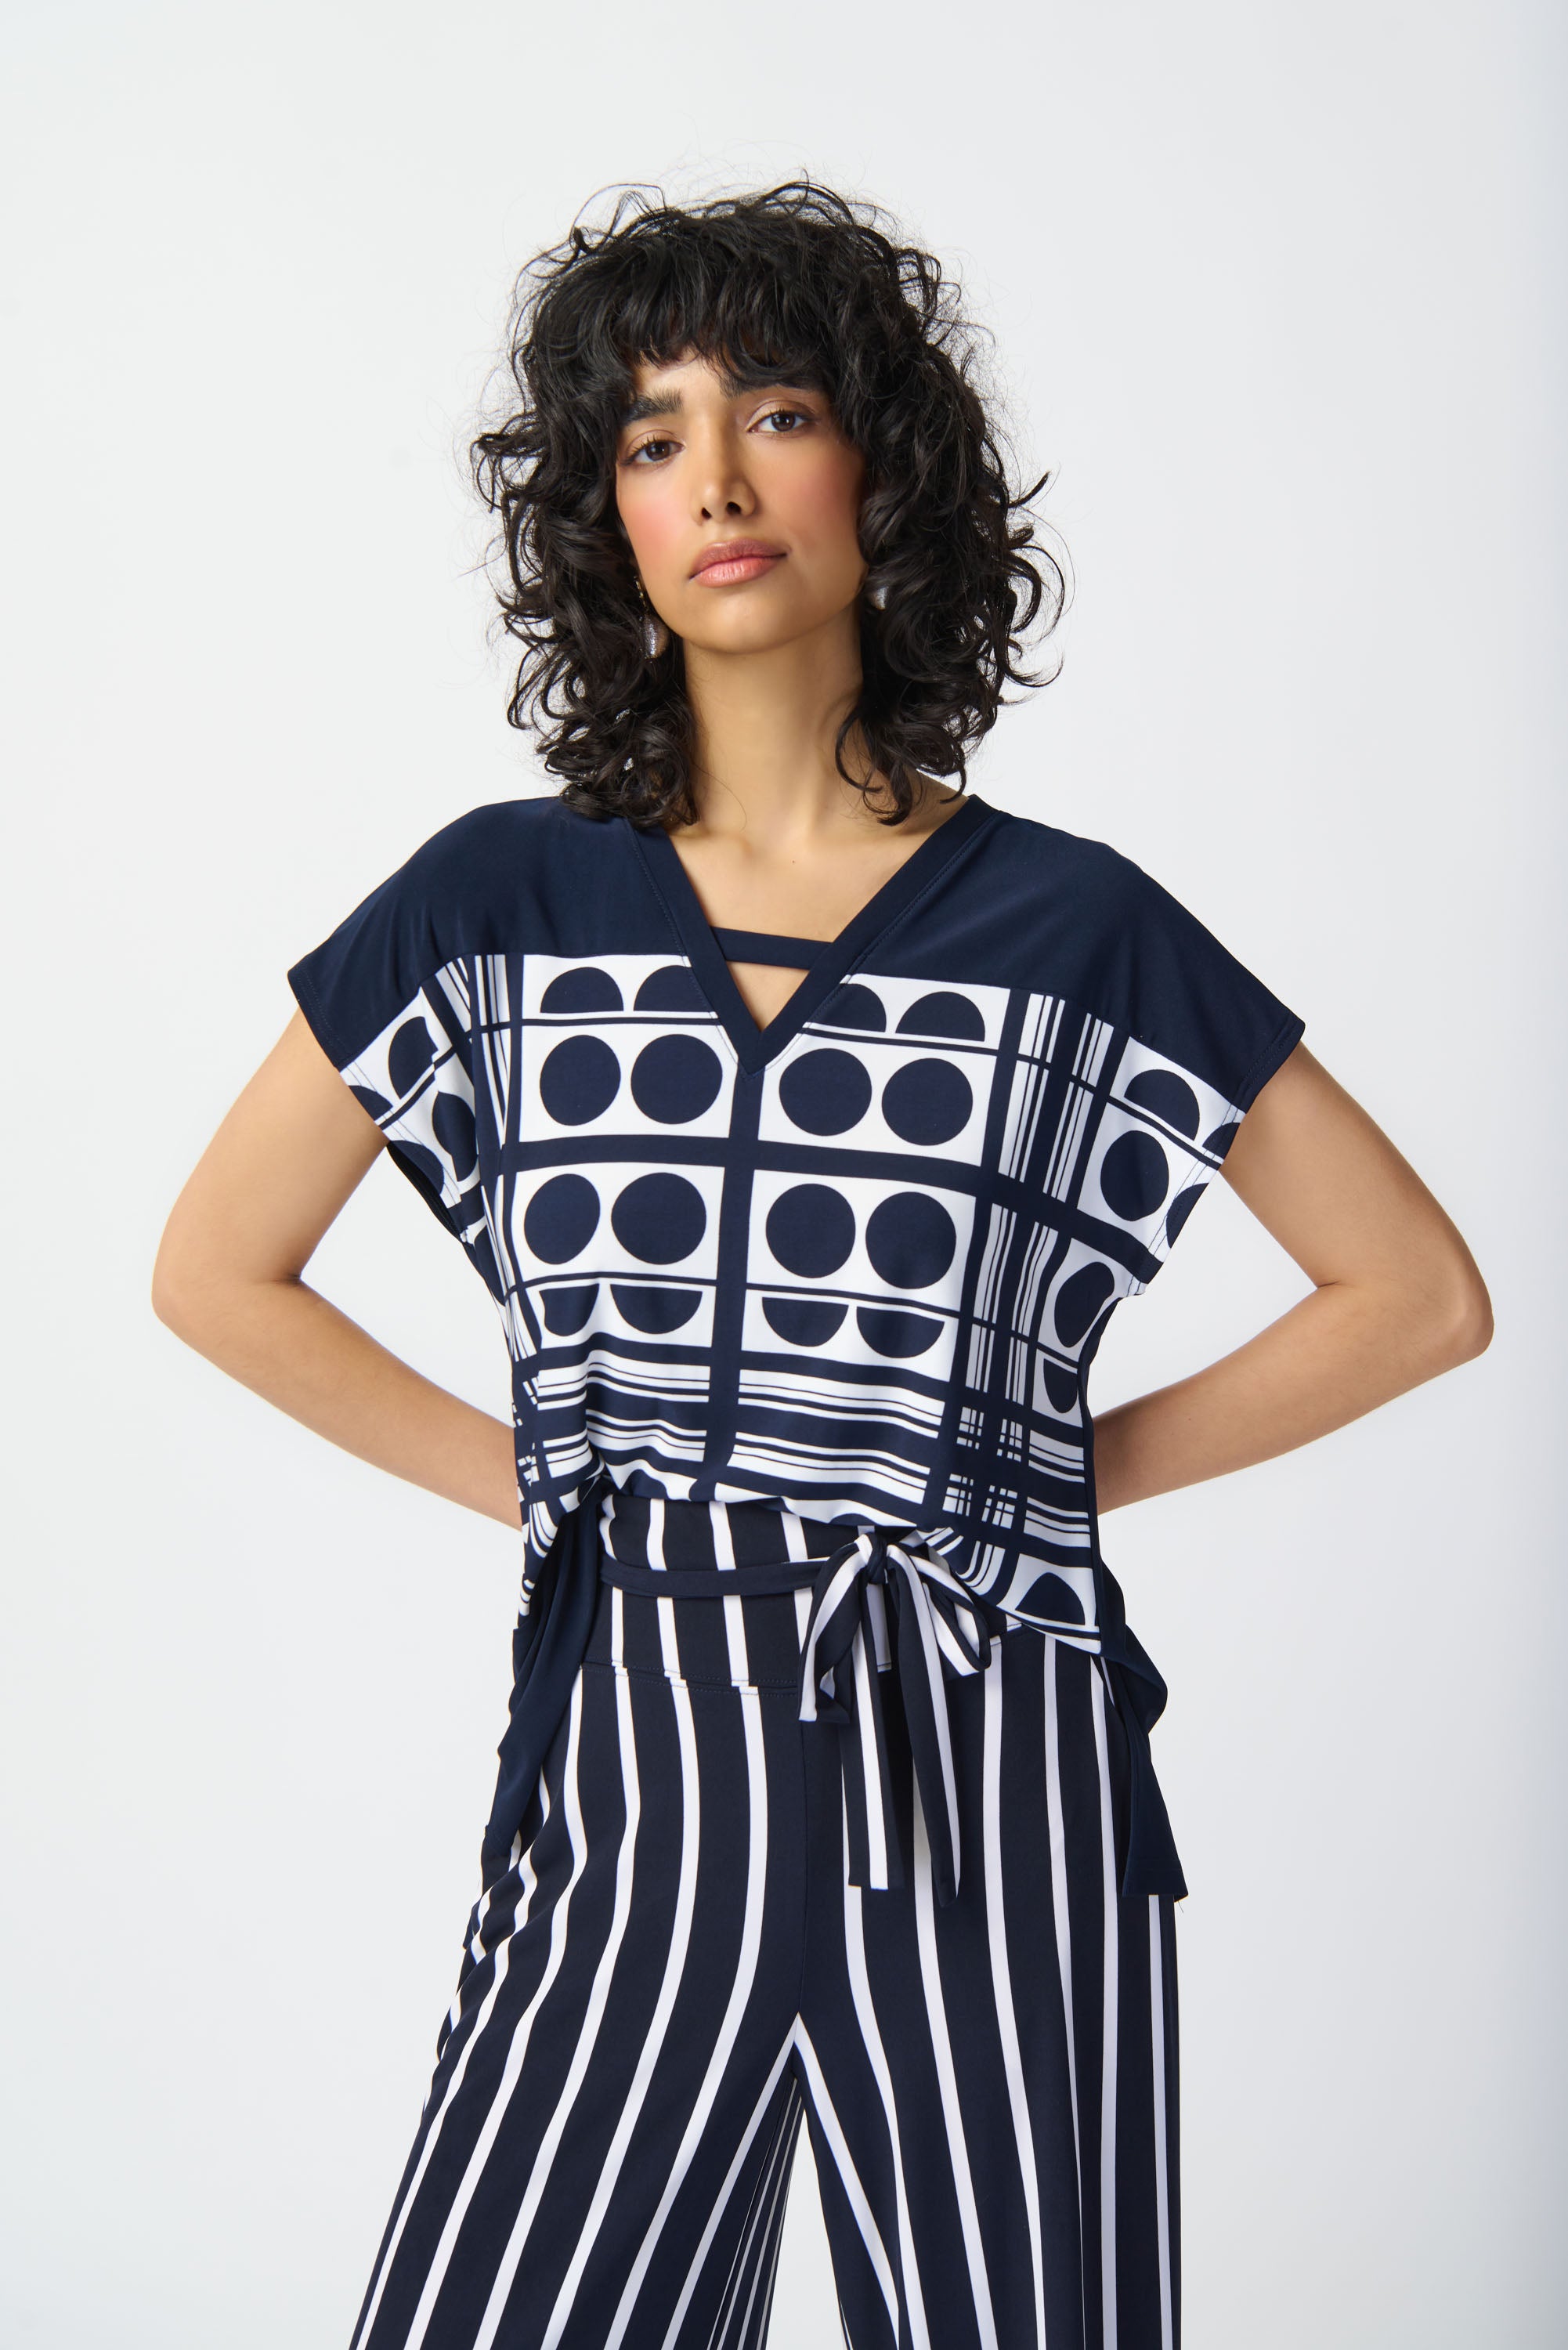 Elevate your look effortlessly with this lovely geometric printed top. The short raglan sleeves and V-shaped neckline lend a relaxed fit for everyday wear and give character to this contemporary piece. The side seam slits at the sweep add a subtle chic detail that also allows for easy movement.